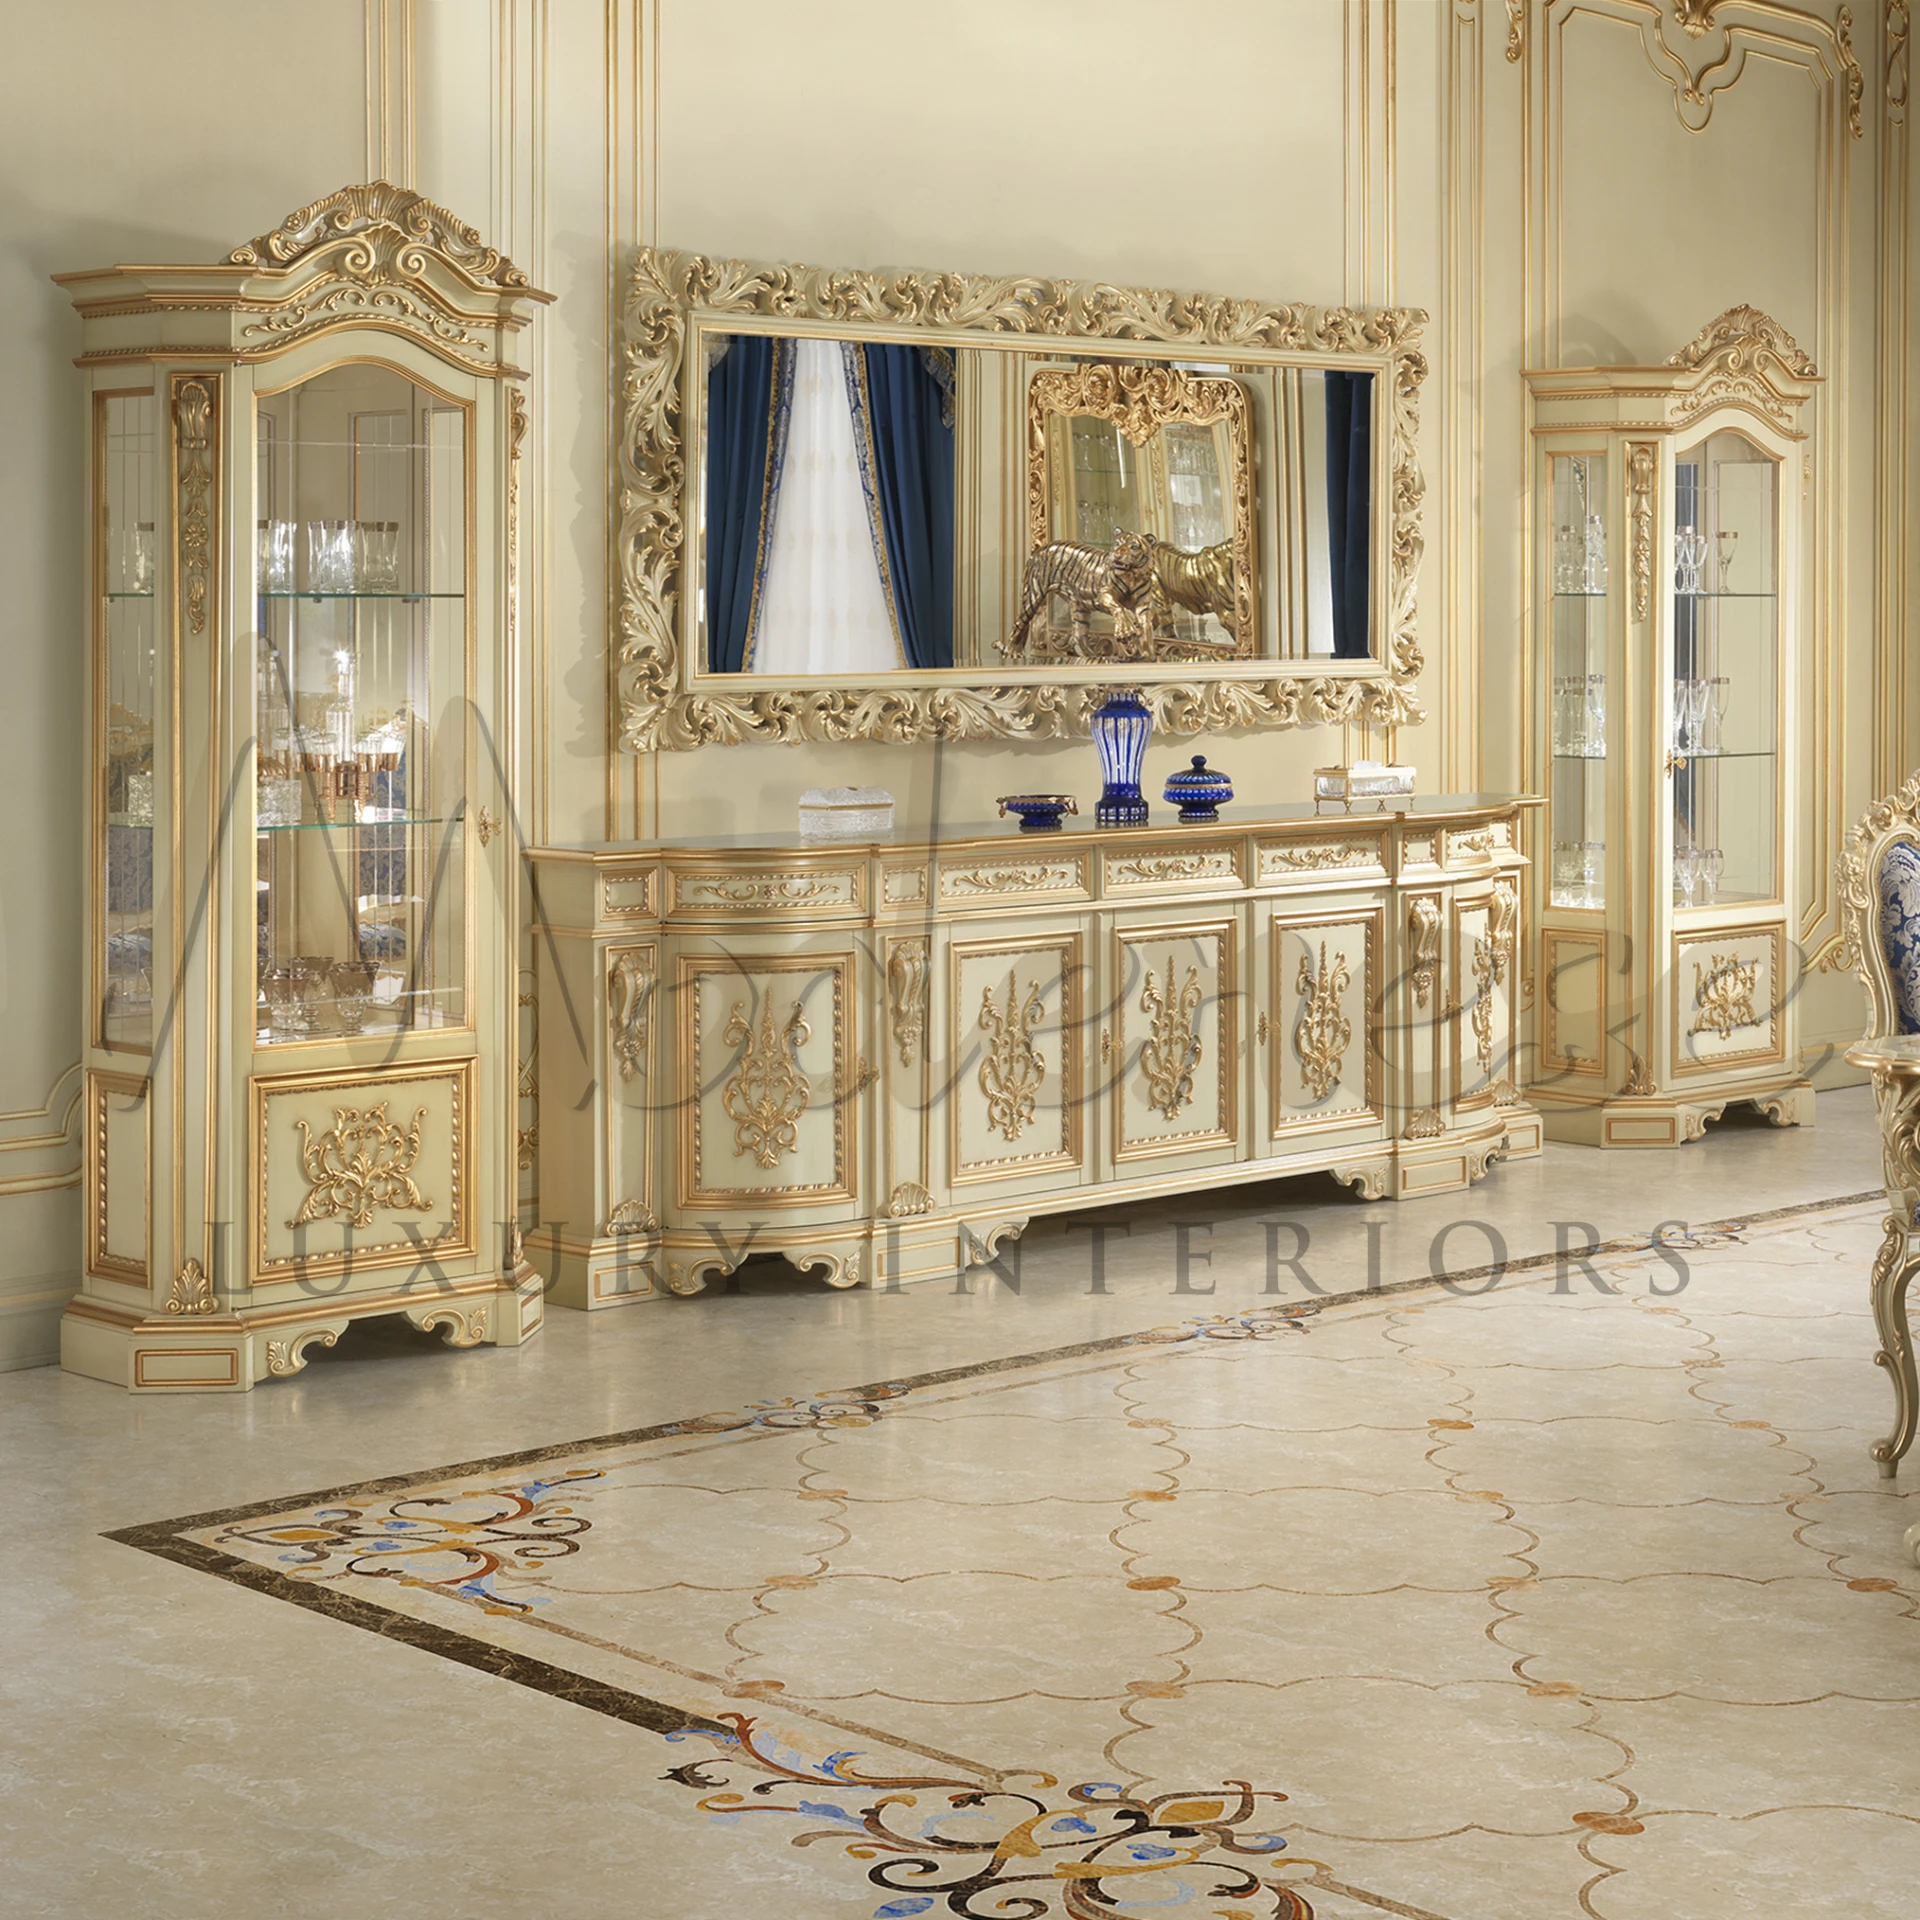 A luxurious room with elegant furniture having complex golden details